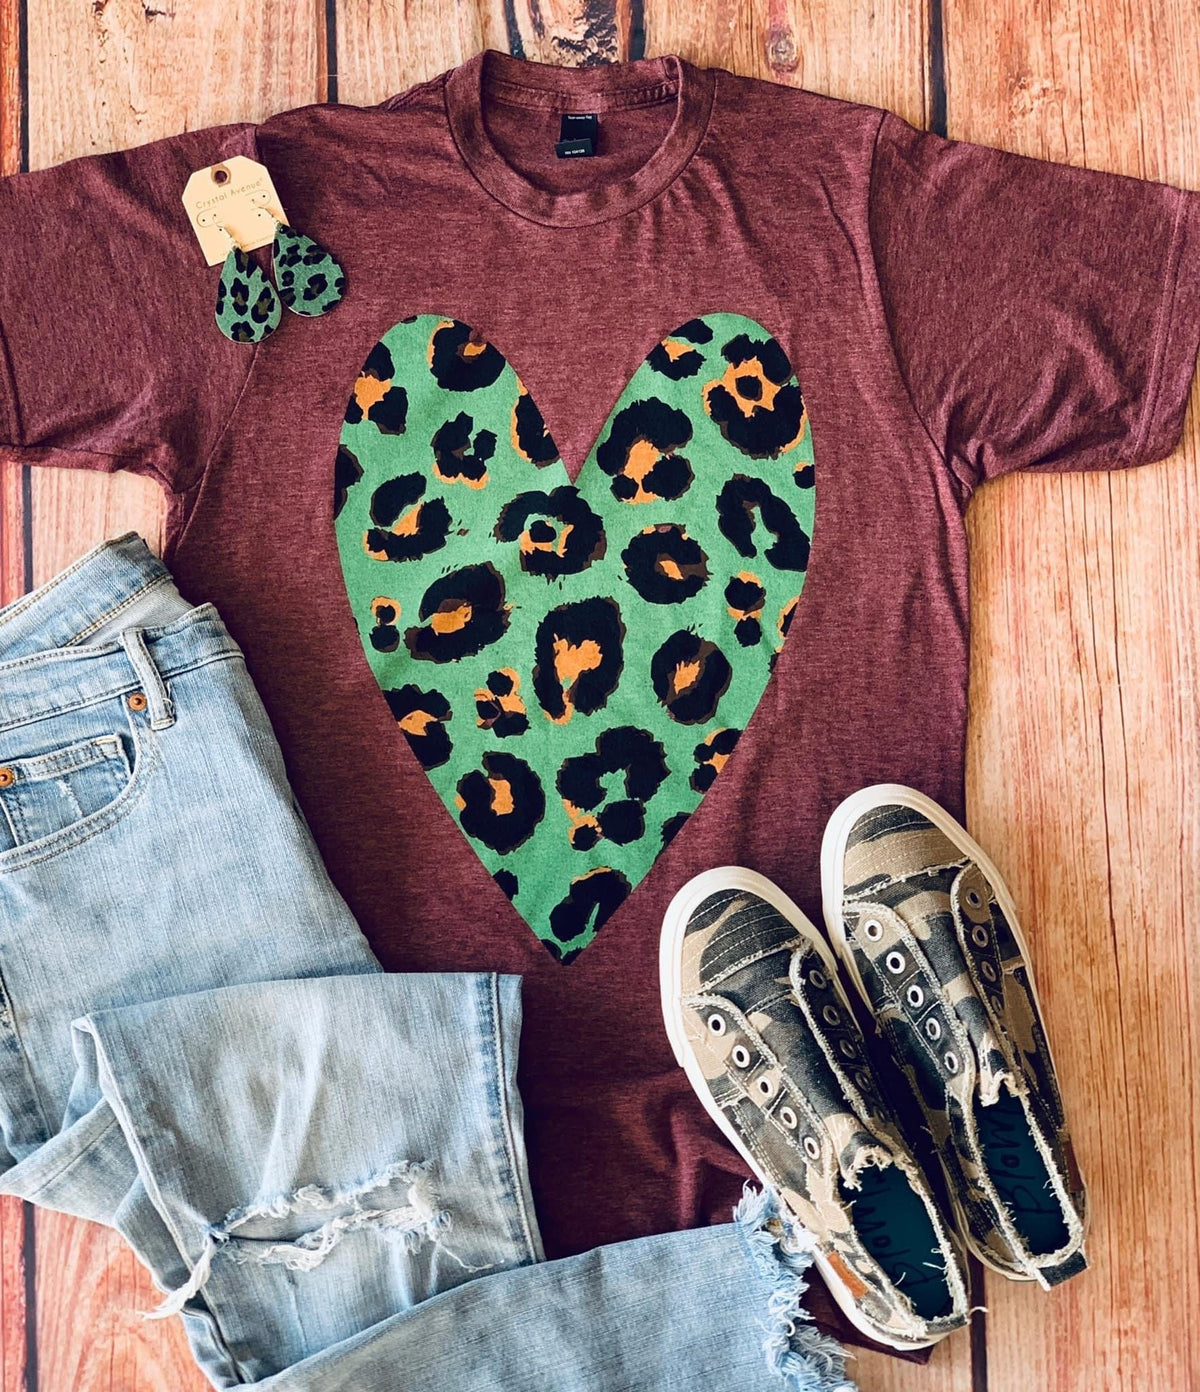 Leopard heart TEE   burgundy/teal Southwest Bedazzle clothing